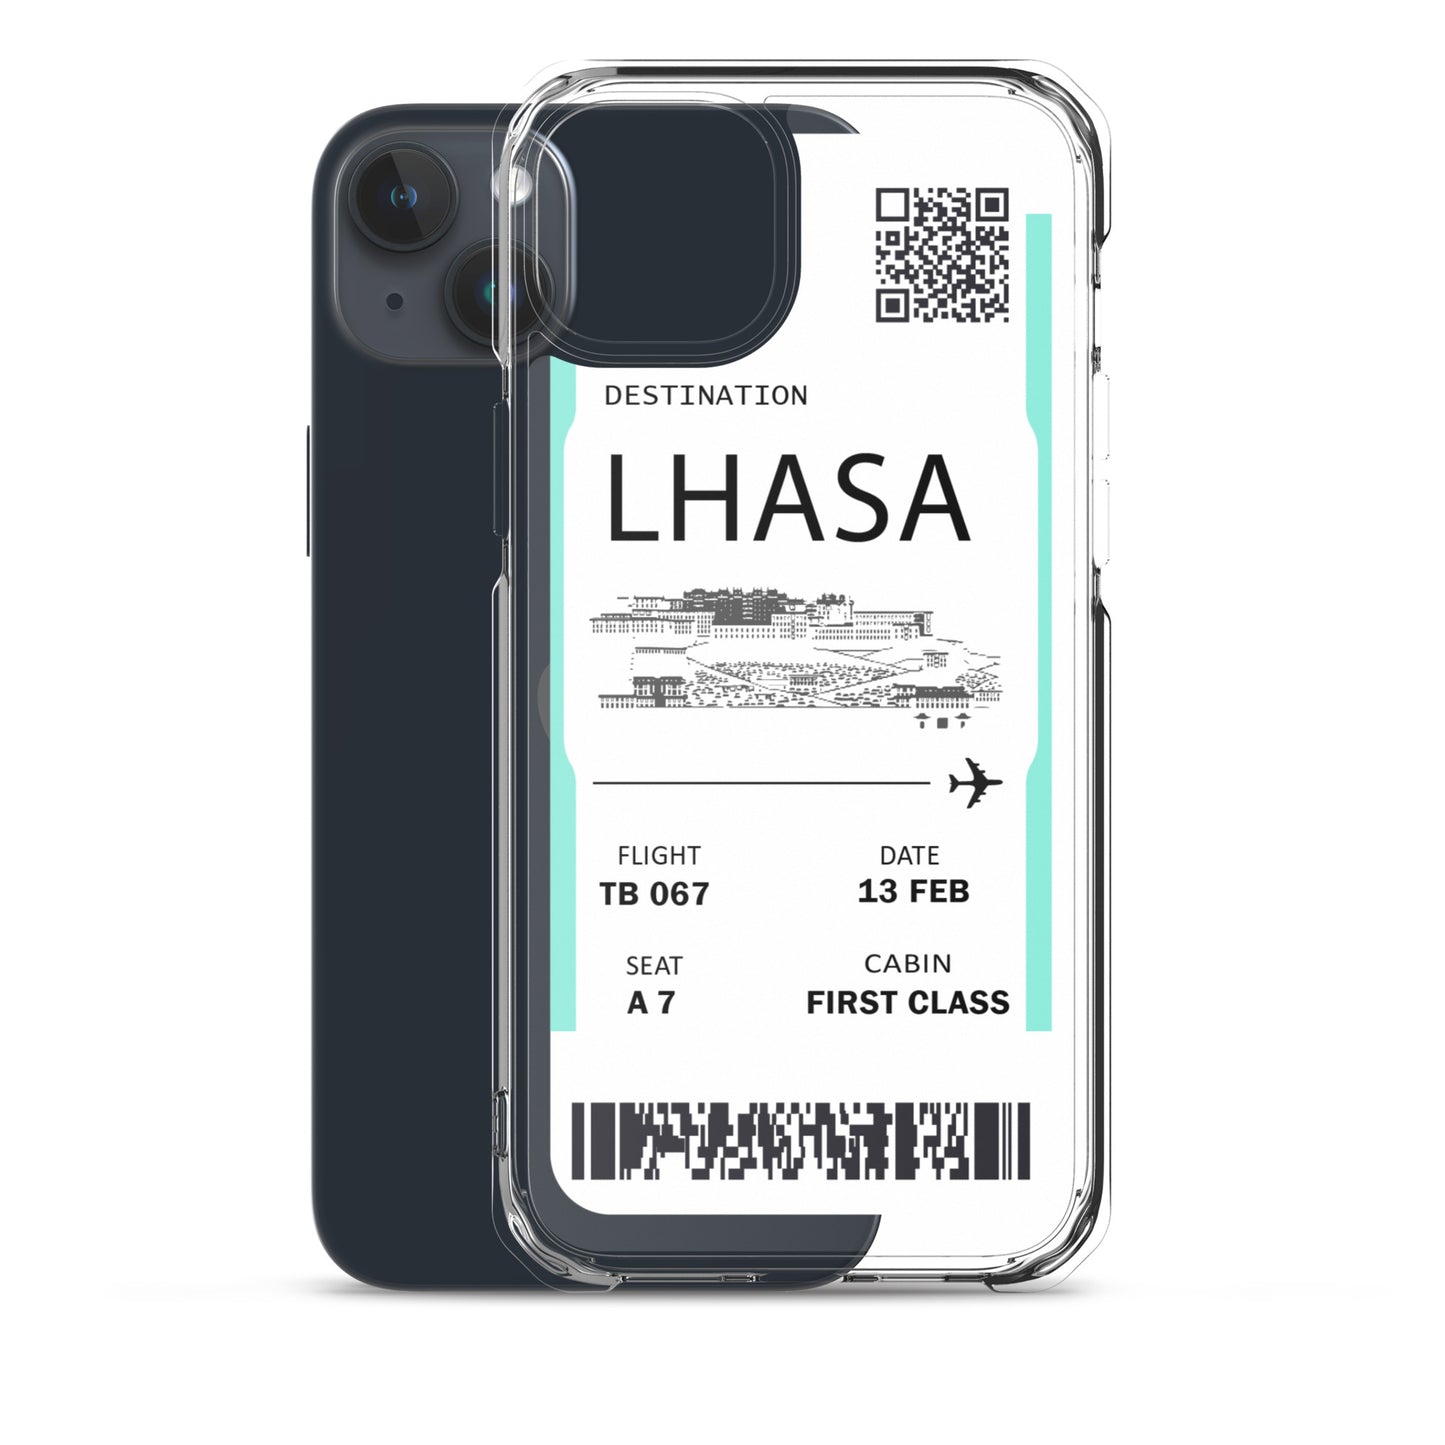 Lhasa Boarding iPhone case are designed under Dzimig Studios' Tibet Archive Project. These sleek clear iPhone case with Lhasa Boarding pass are available in three mild tone colors. 